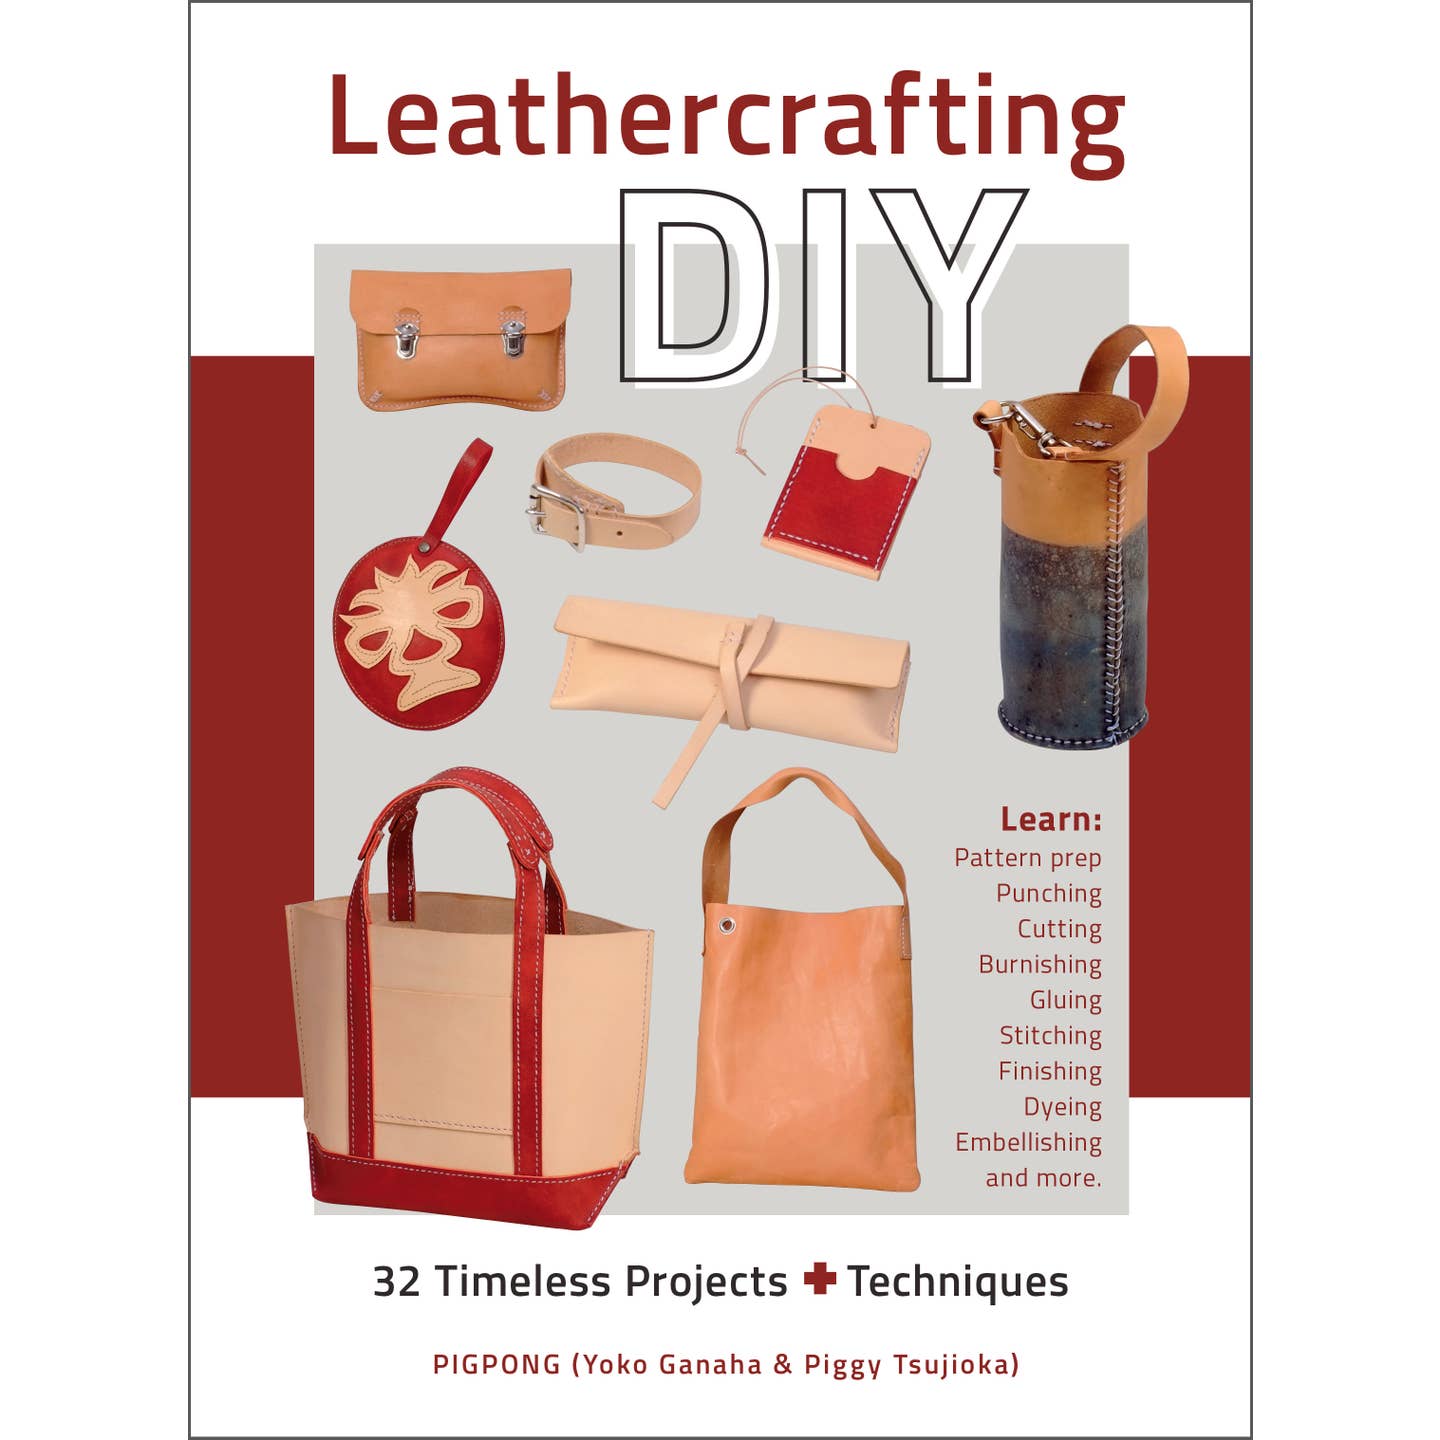 Leathercrafting DIY: 32 Timeless Projects Plus Techniques